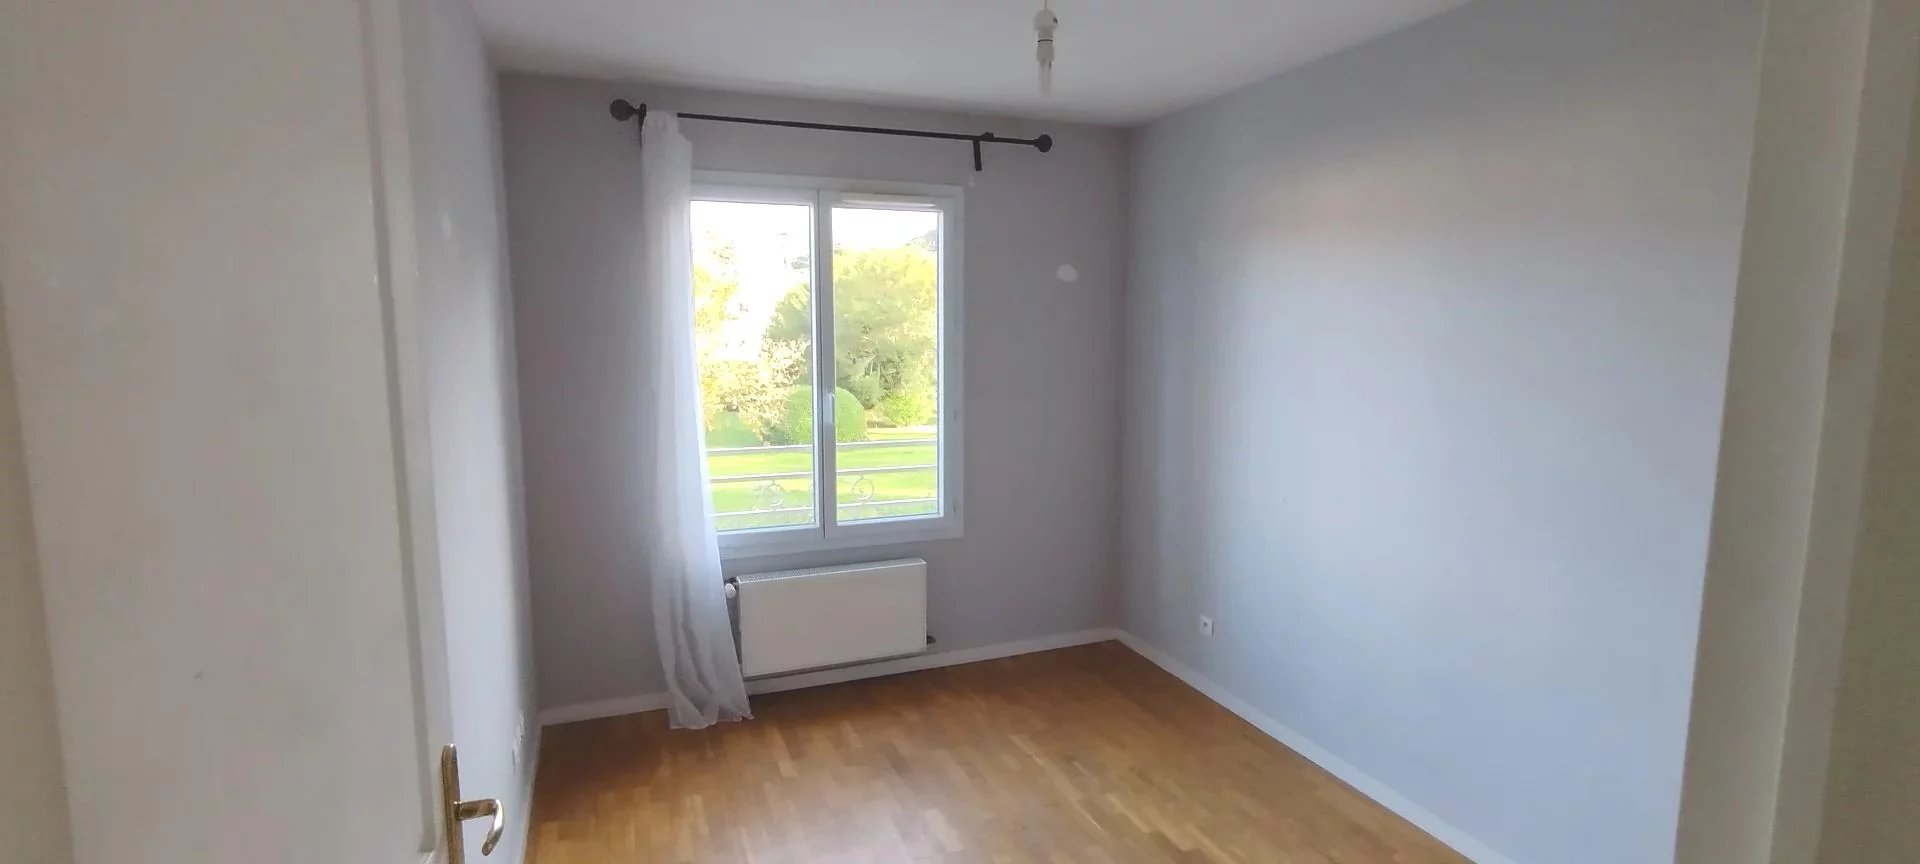 VENTE APPARTEMENT – F3 – CHASSELAY